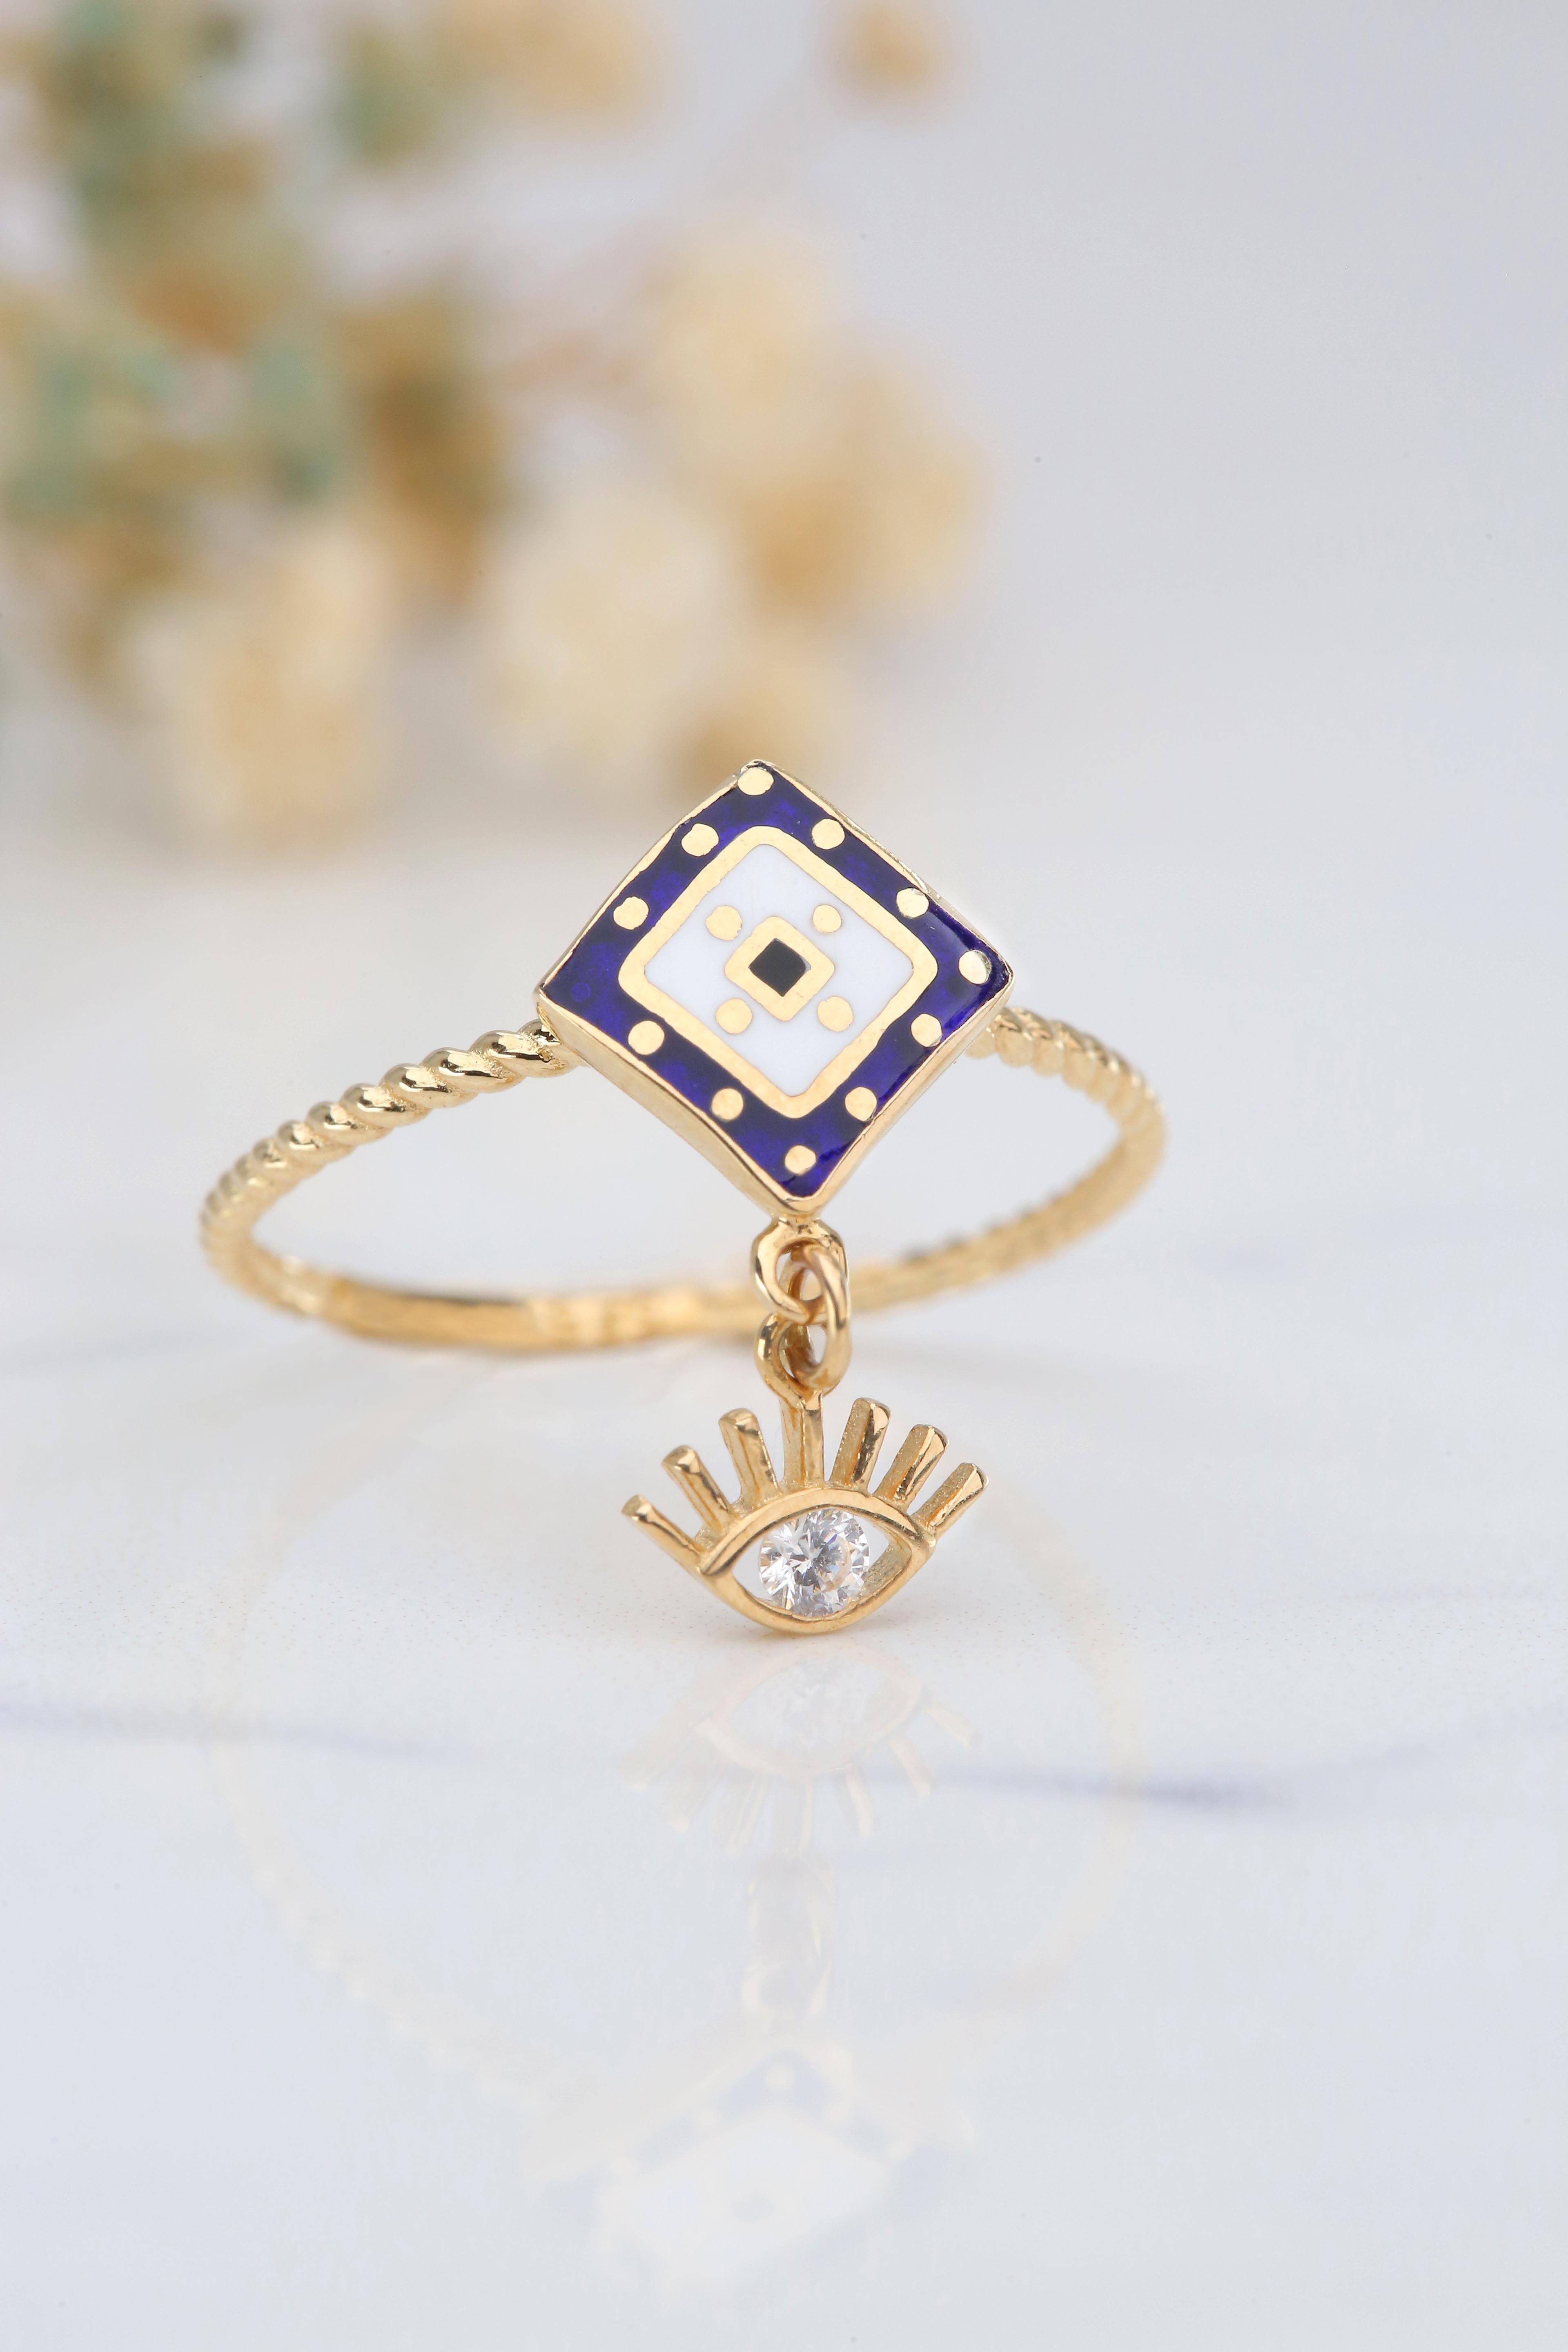 14K Gold Dainty Cable Ring with Eye Pendant and Lapis Enameled 7